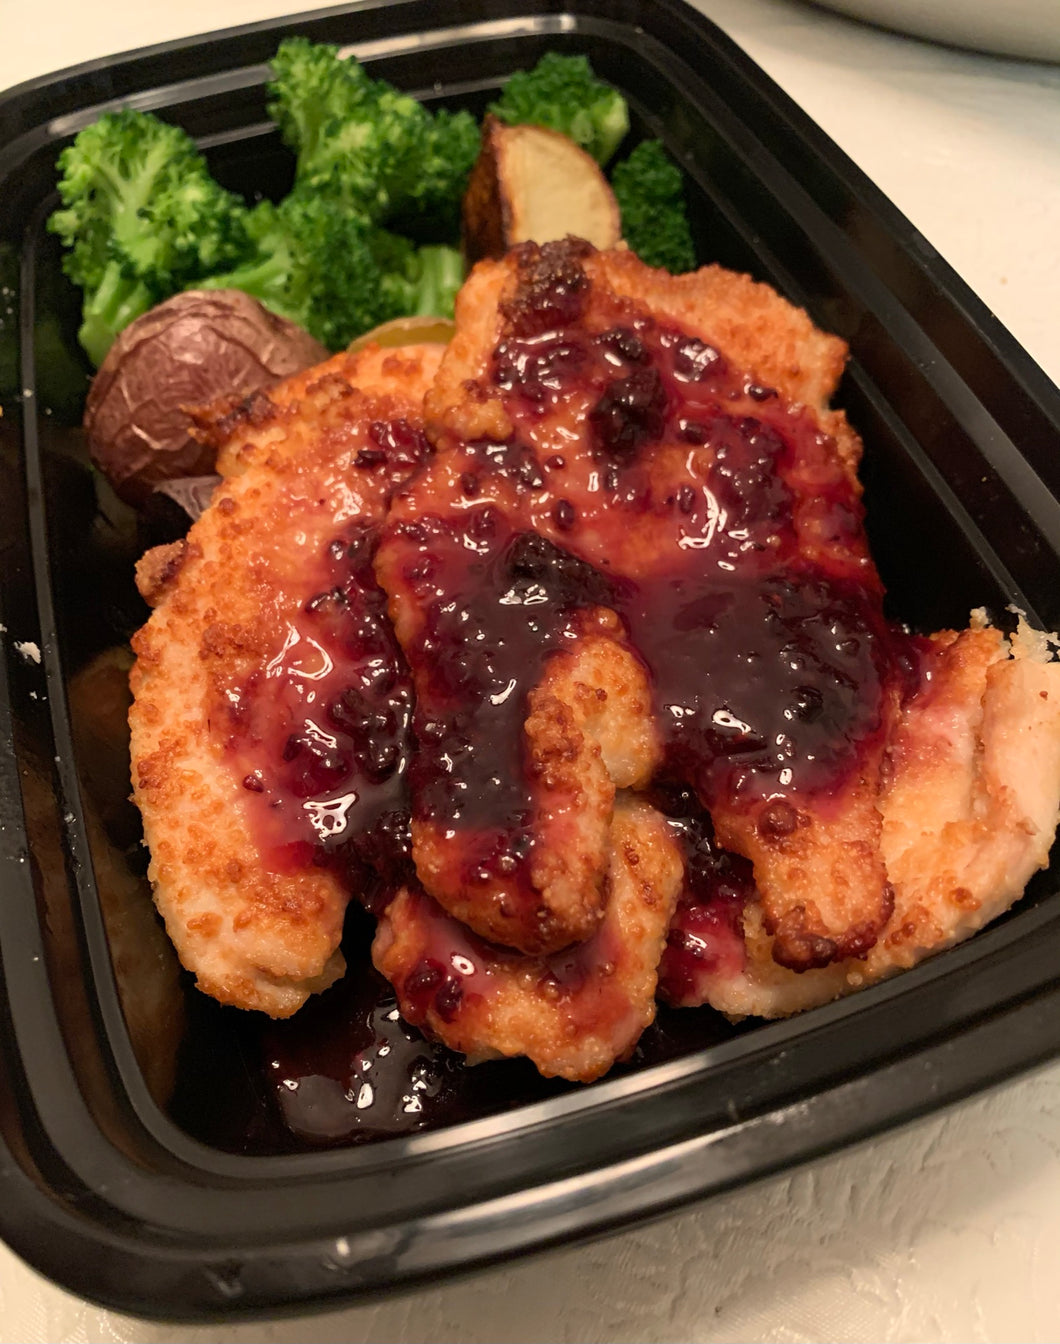 Parmesan Crusted Chicken Breast with a Blackberry Citrus Glaze